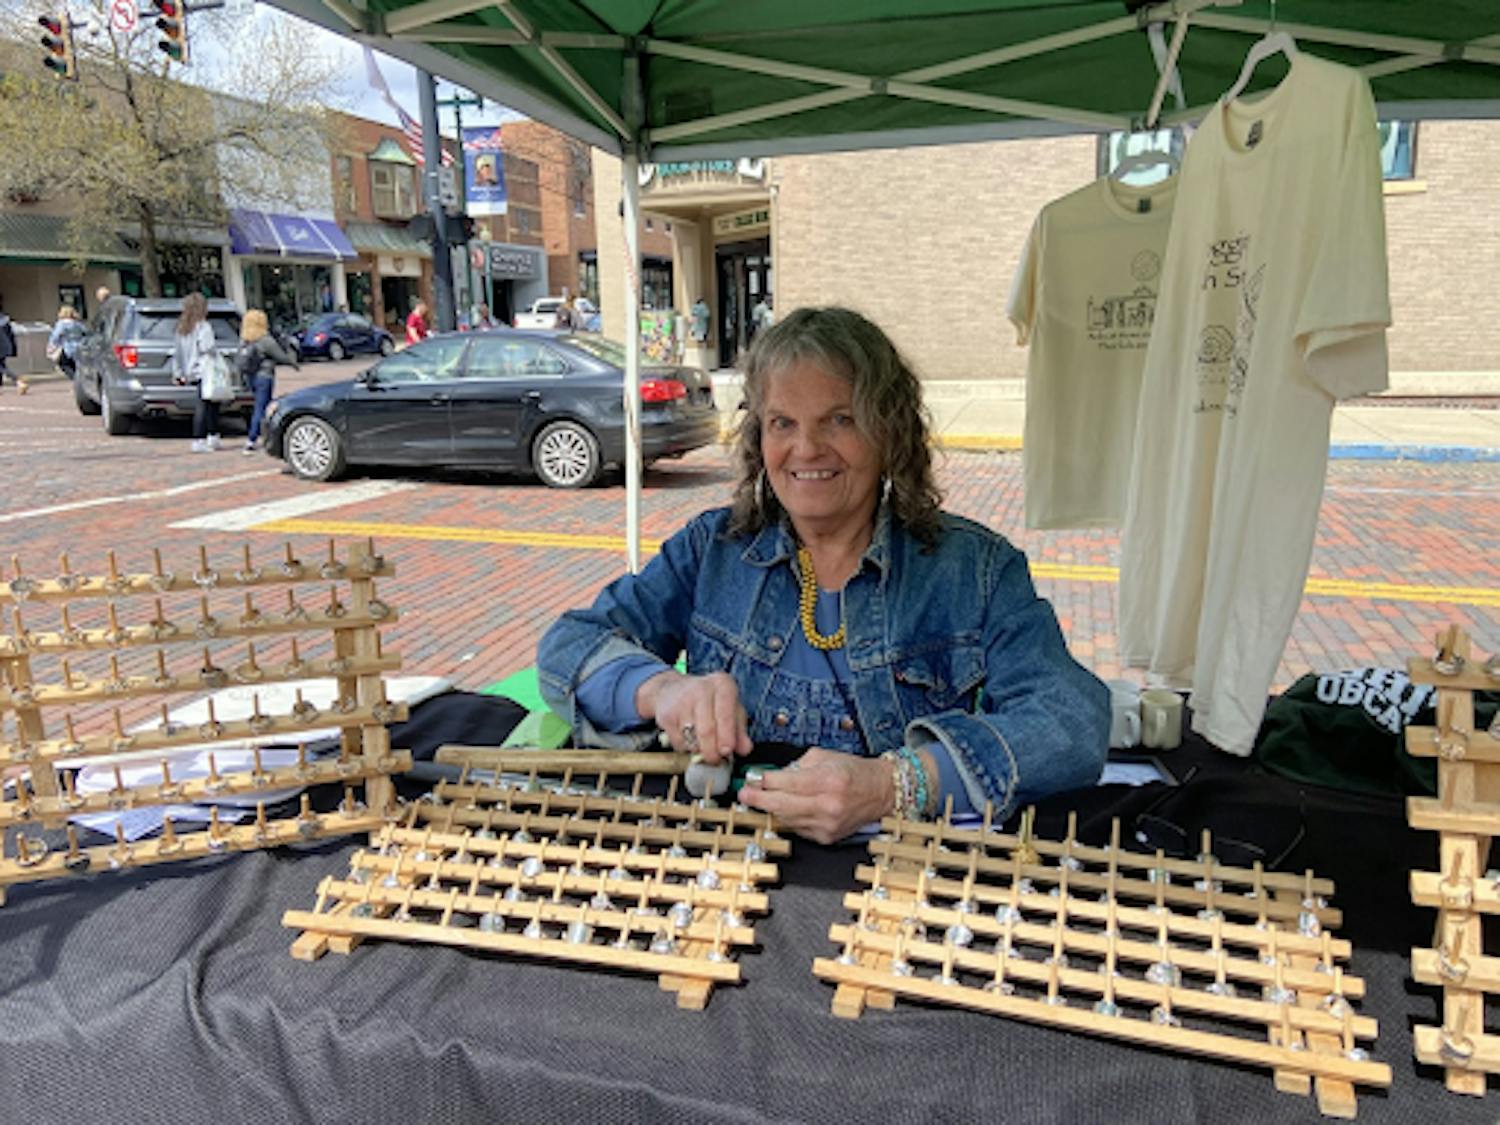 Cricket Jones set up her stand for customers on Court Street during Mom’s Weekend and sold her handmade jewelry.&nbsp;